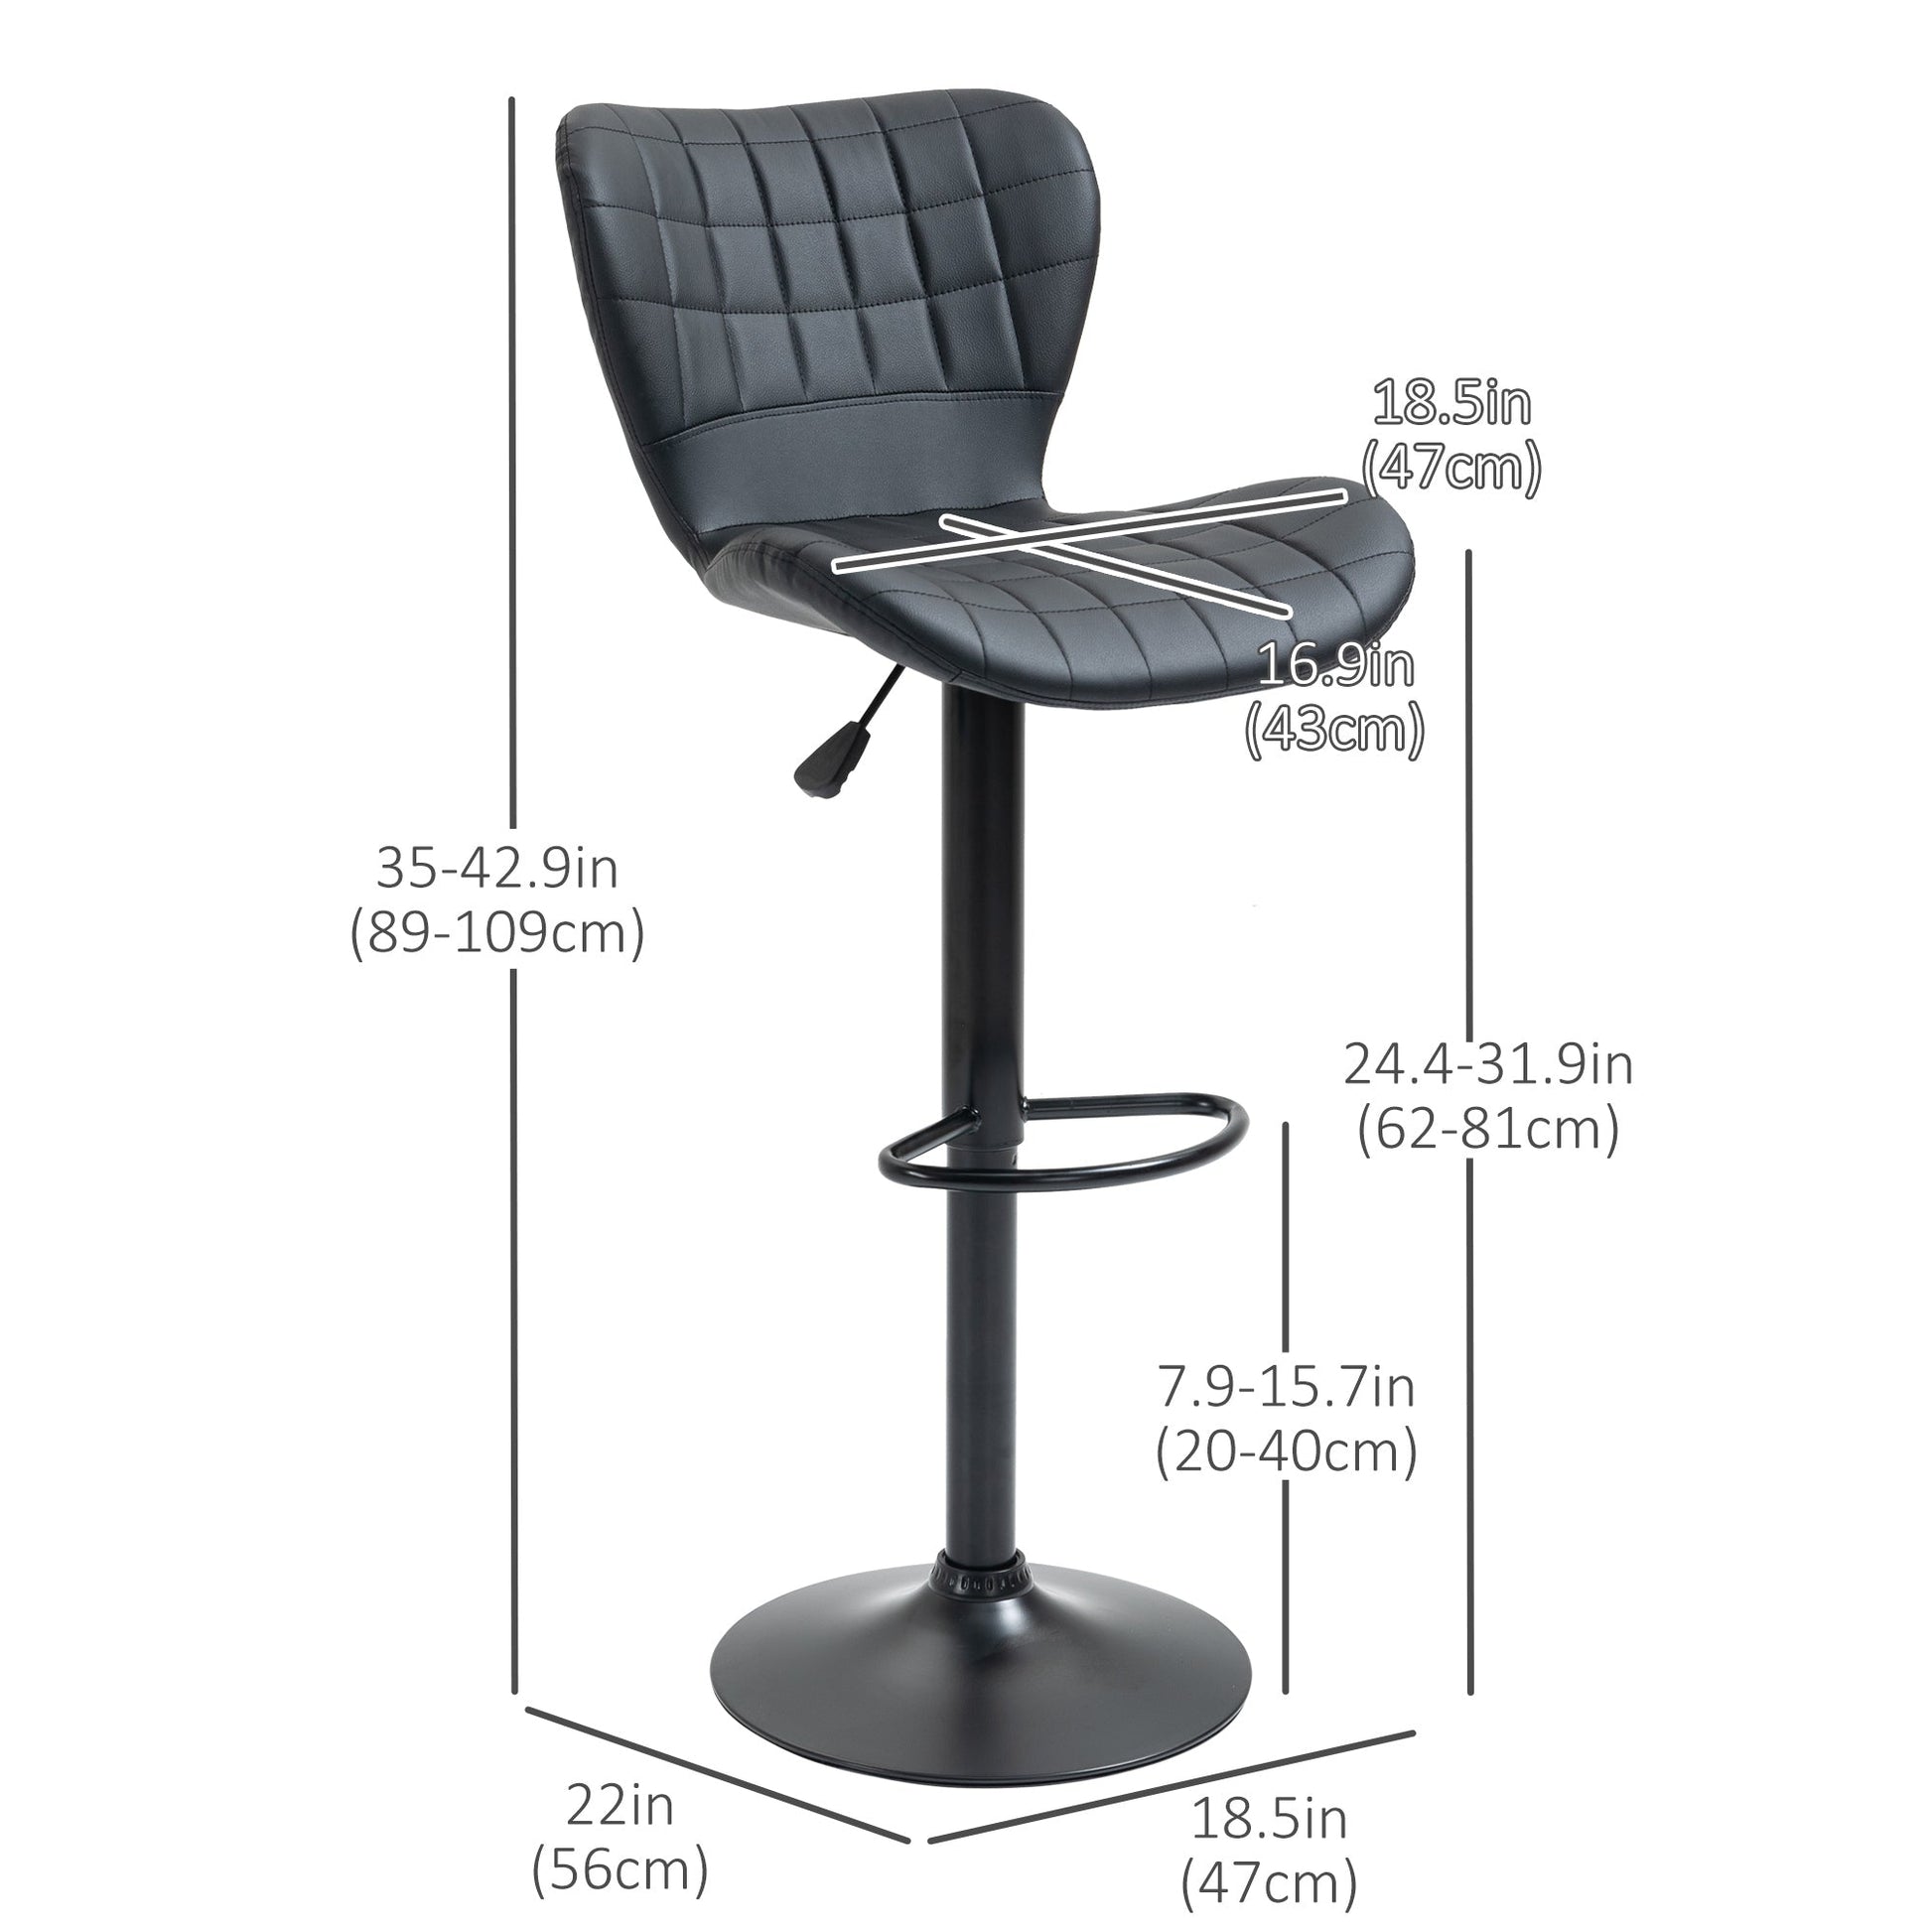 Bar Stools Set of 2 Adjustable Height Swivel Bar Chairs in PU Leather with Backrest &; Footrest, Black at Gallery Canada